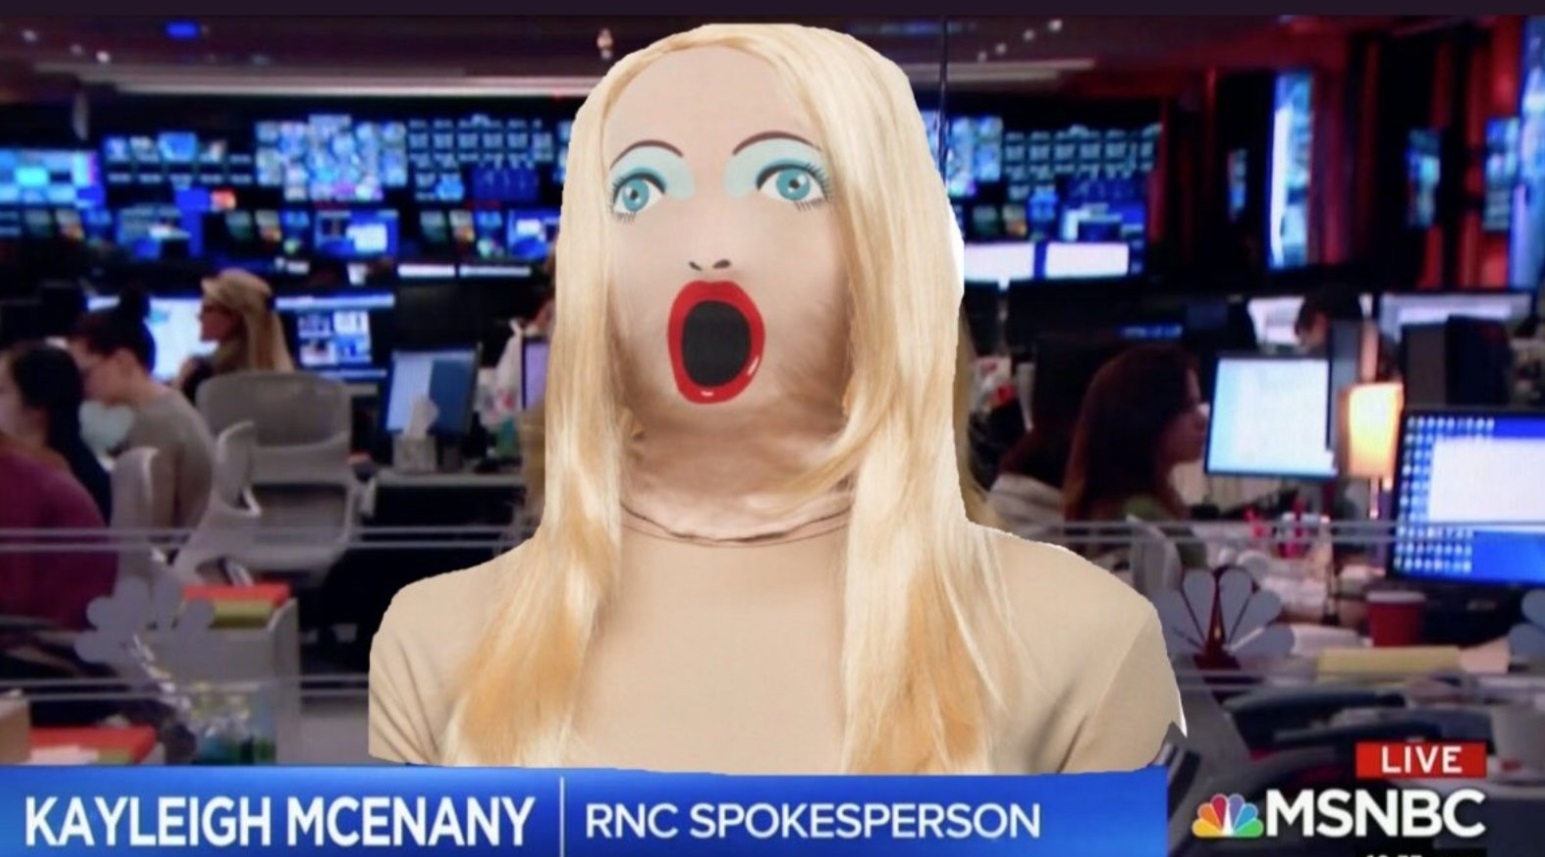 Kayleigh McEnany Blow Up Doll On MSNBC. 